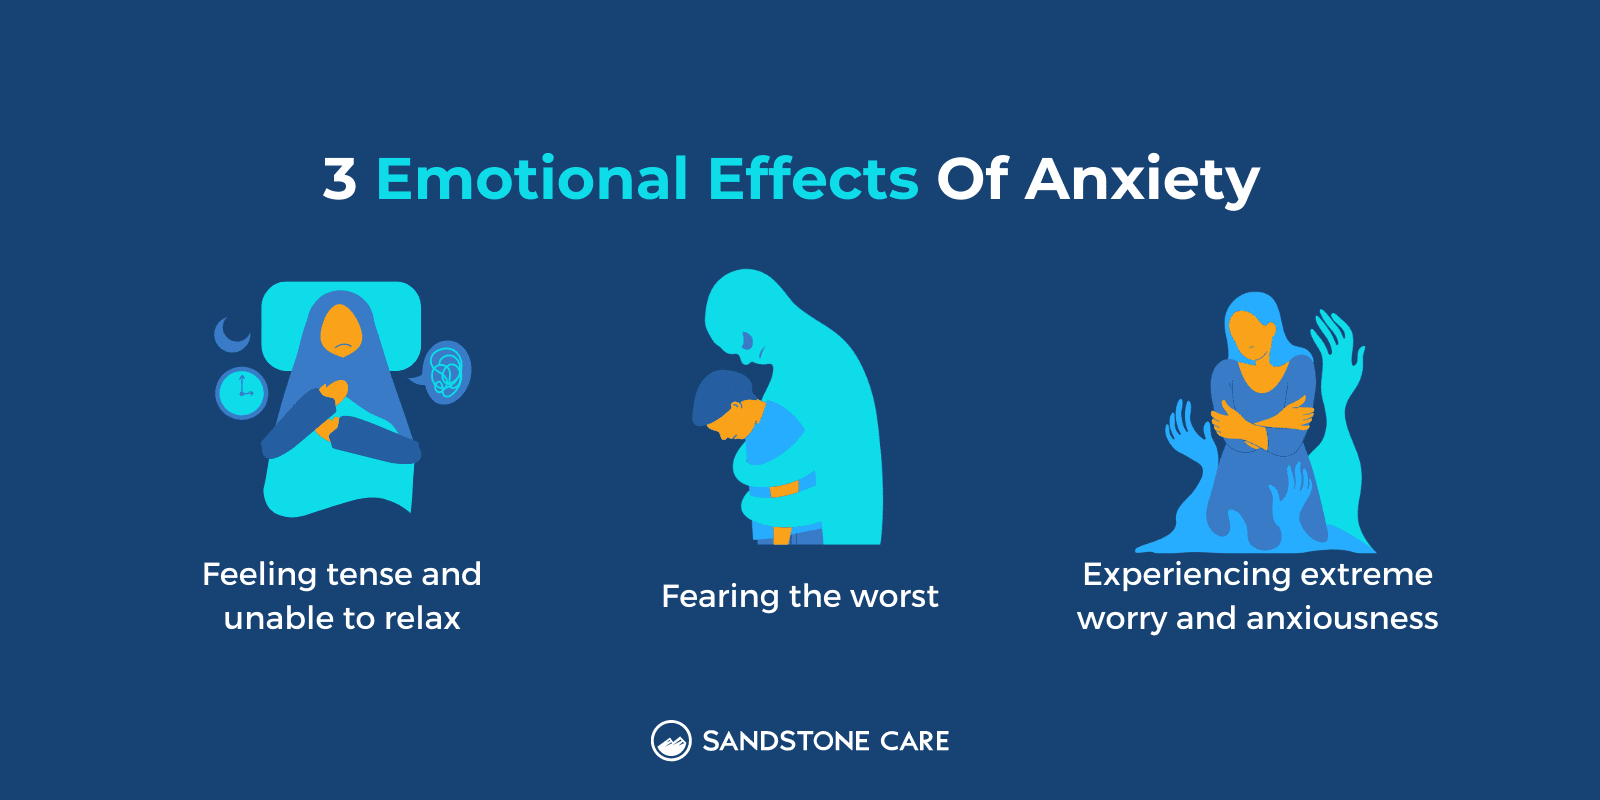 3 Emotional Effects of Anxiety illustrated with relevant digital graphics